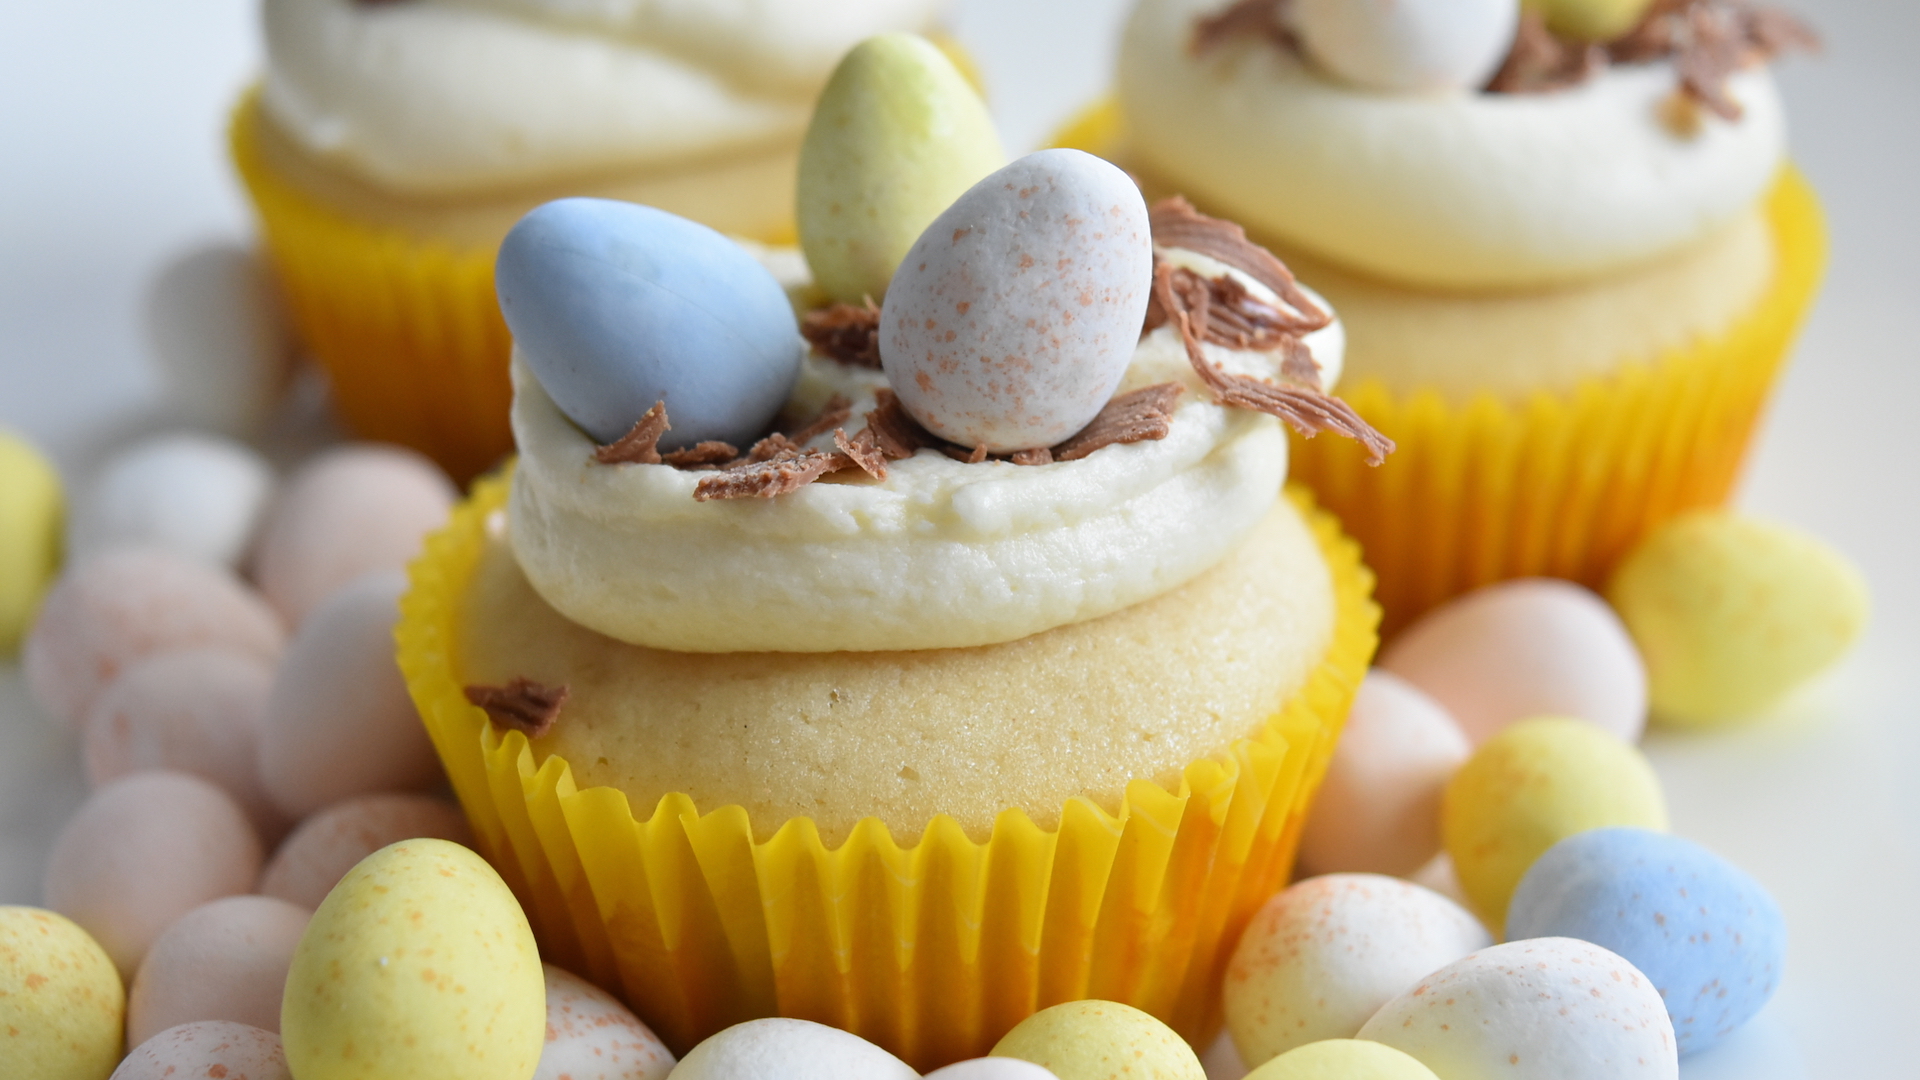 A cupcake decorated with small eggs